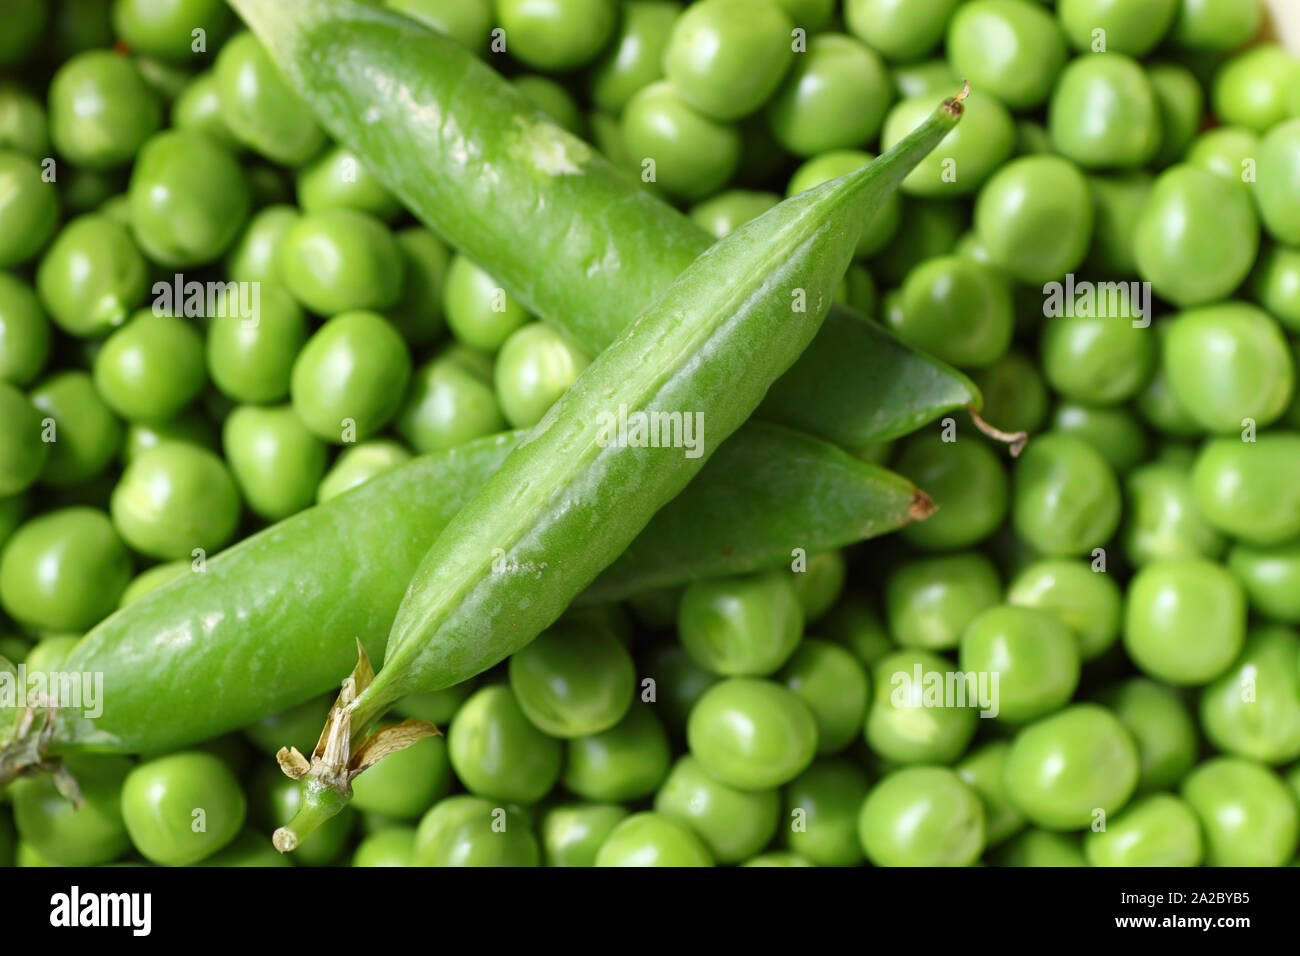 Fresh green peas. Close-up picture Stock Photo